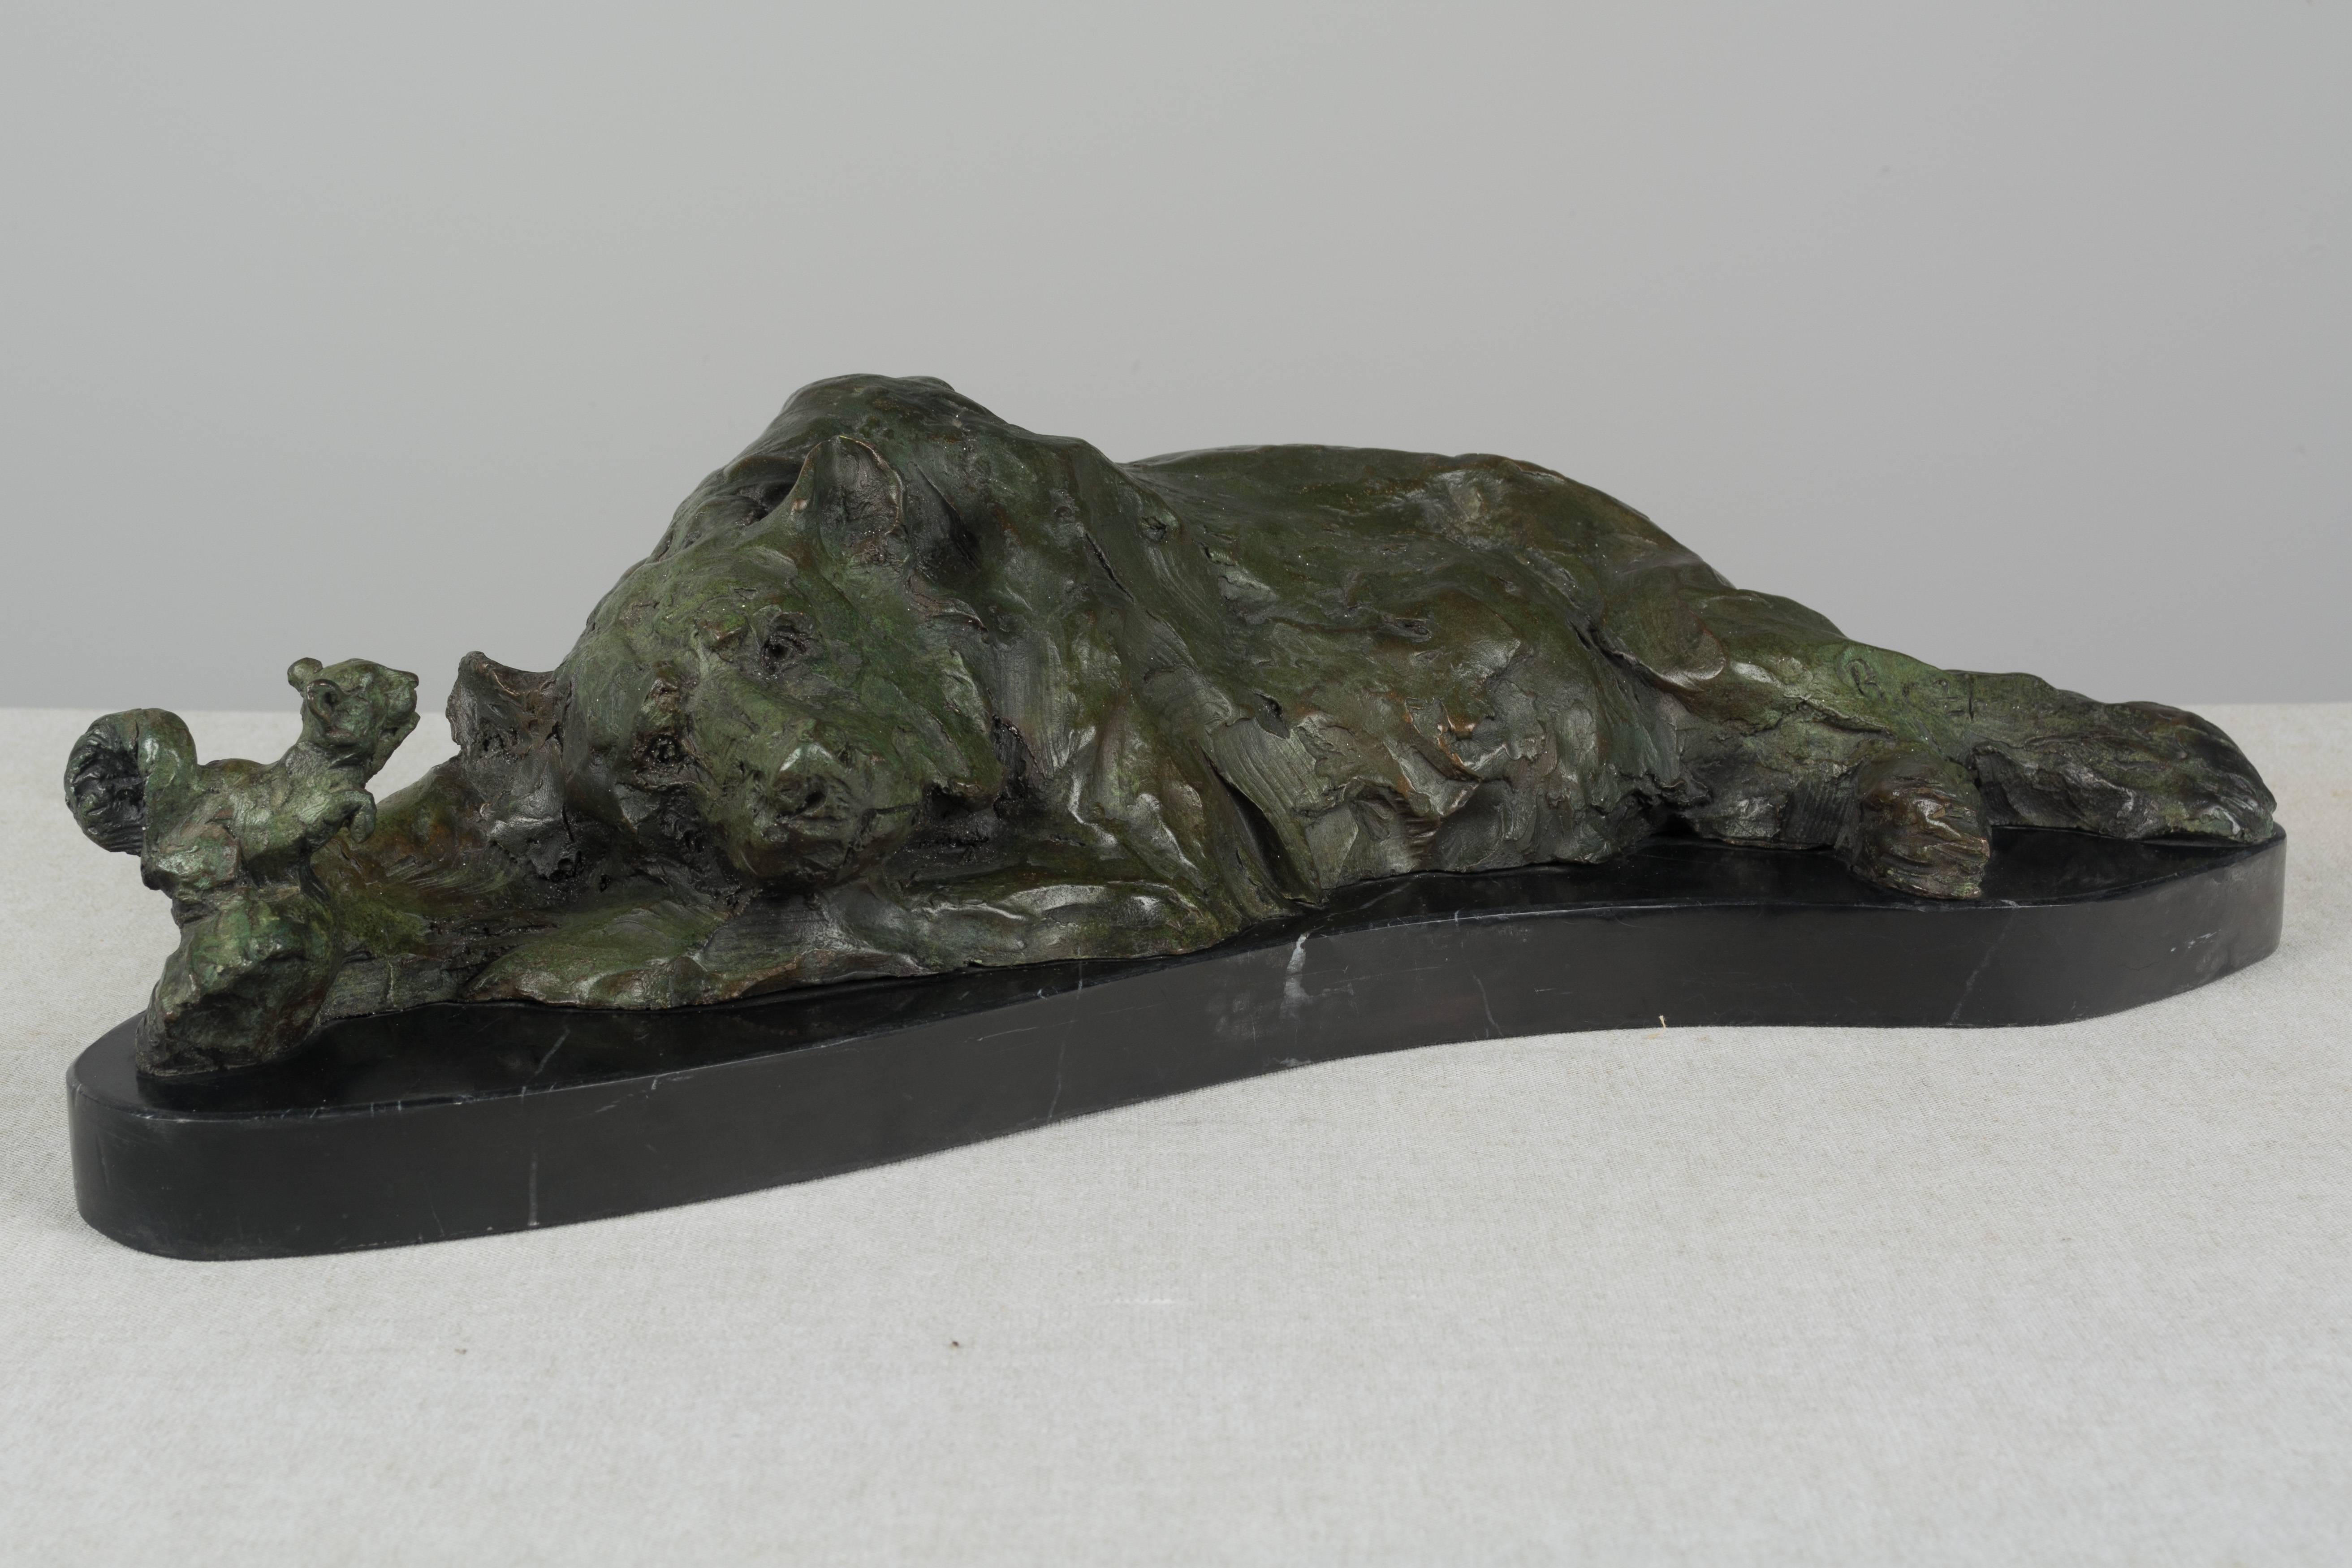 A charming 19th century bronze sculpture of a resting bear and a squirrel. The little squirrel sits on the bear's paw and appears to be whispering in his ear. Perhaps a scene from a children's fable. Beautiful green patina. Black marble base.